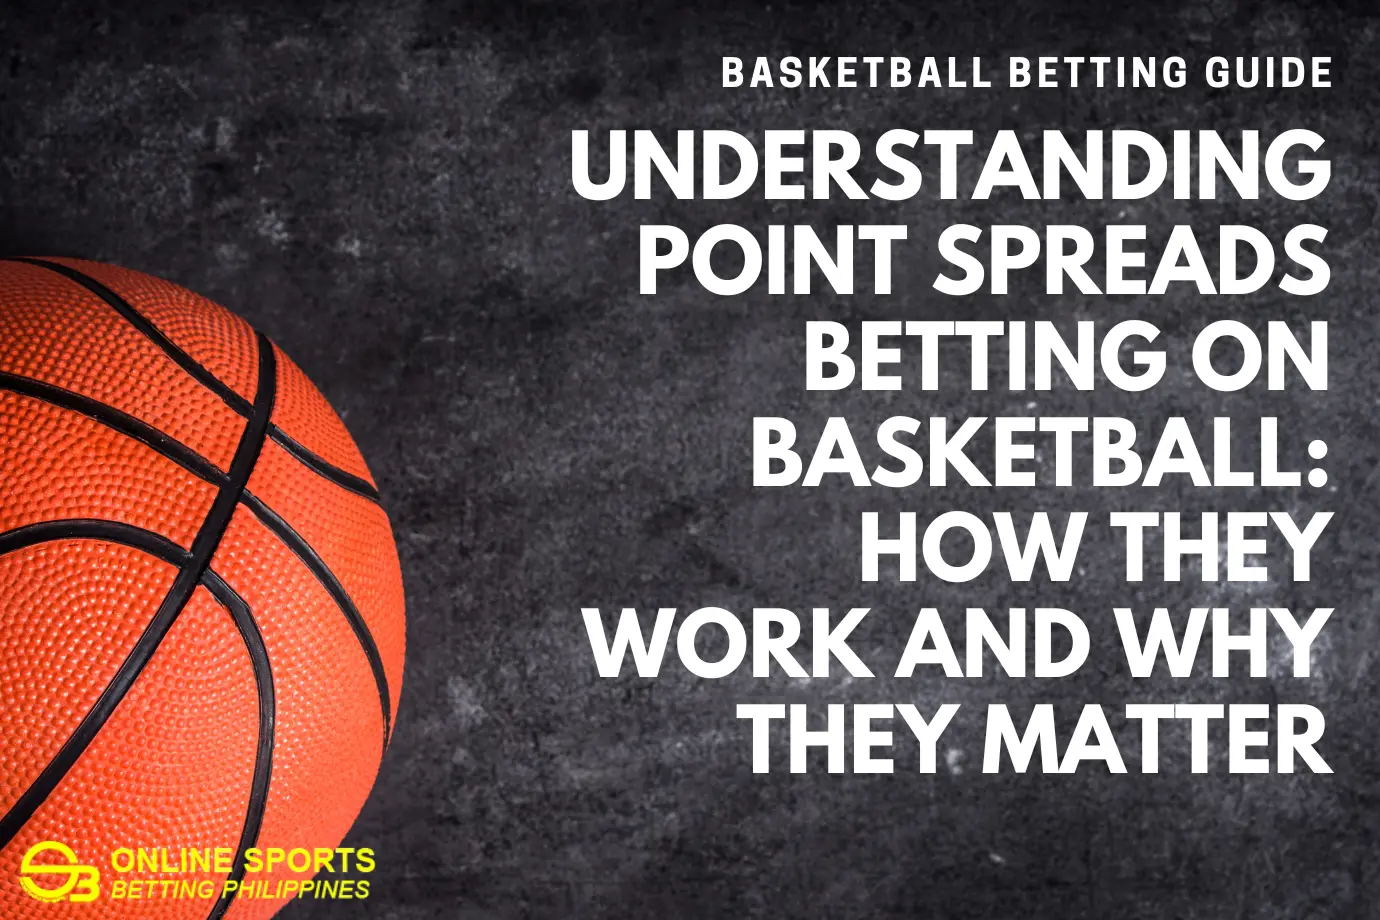 Understanding Point Spreads Betting on Basketball: How They Work and Why They Matter